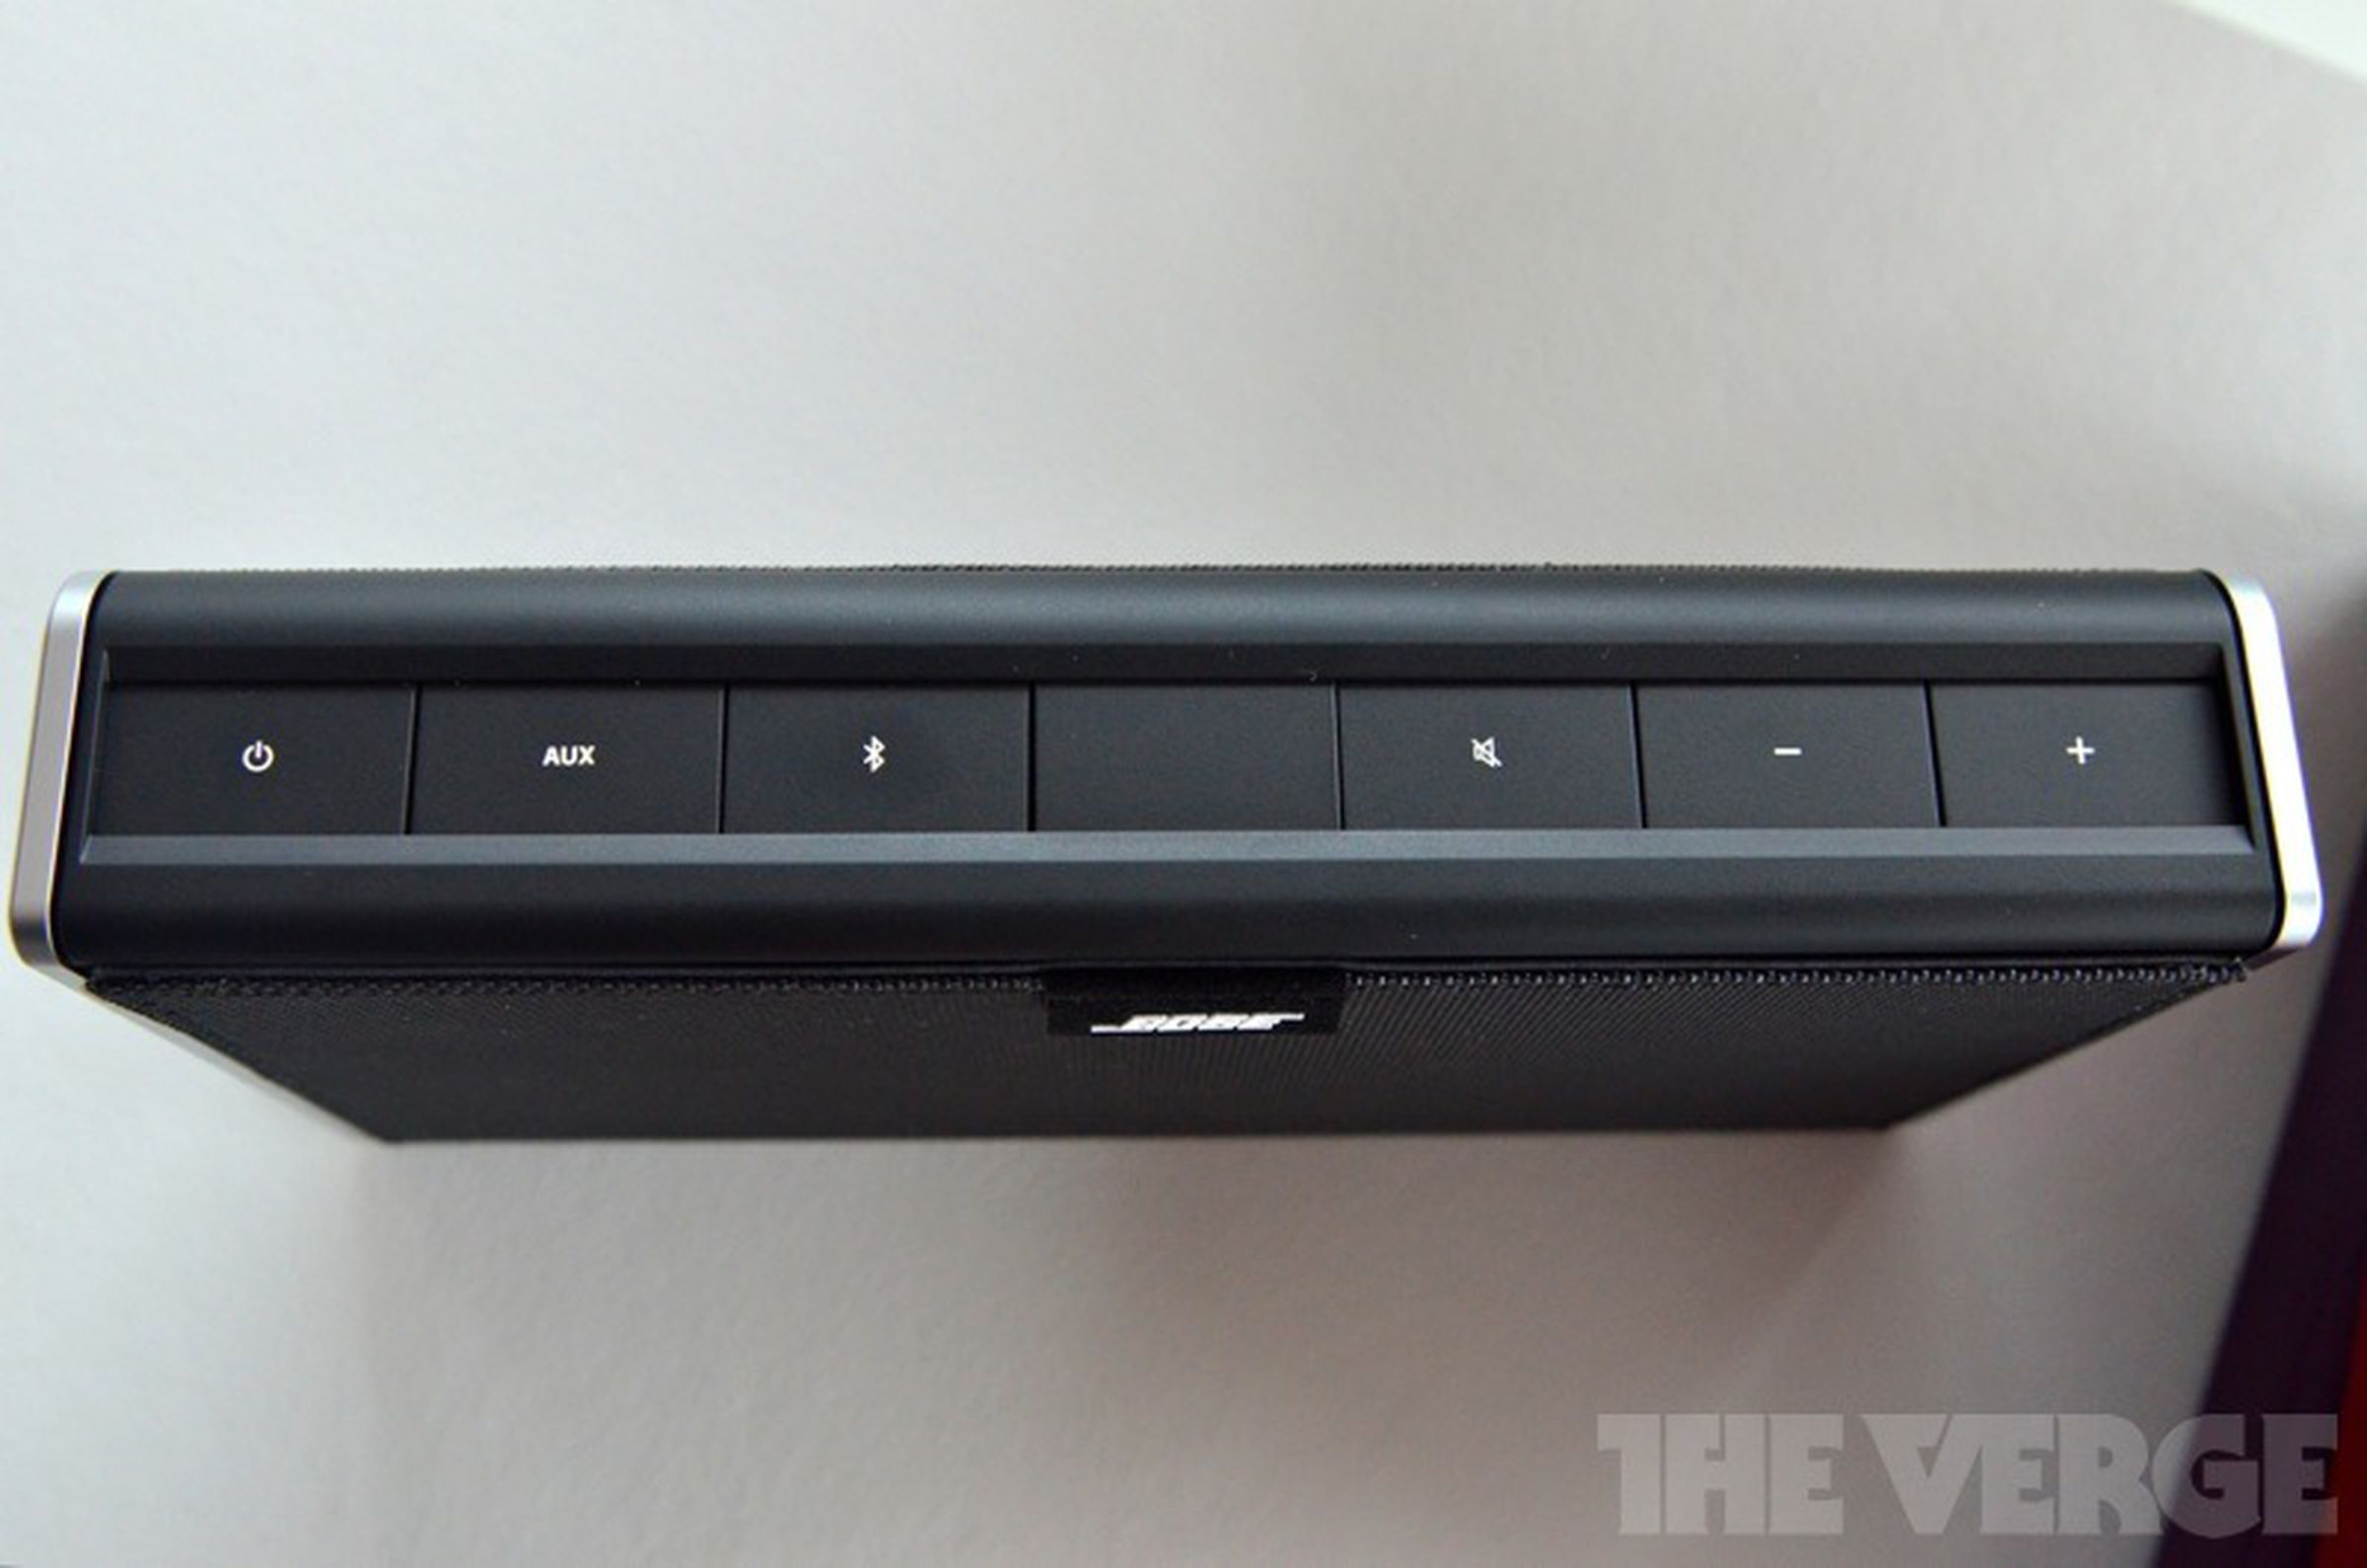 Bose Soundlink Mobile portable Bluetooth speaker announced: pictures and hands-on preview